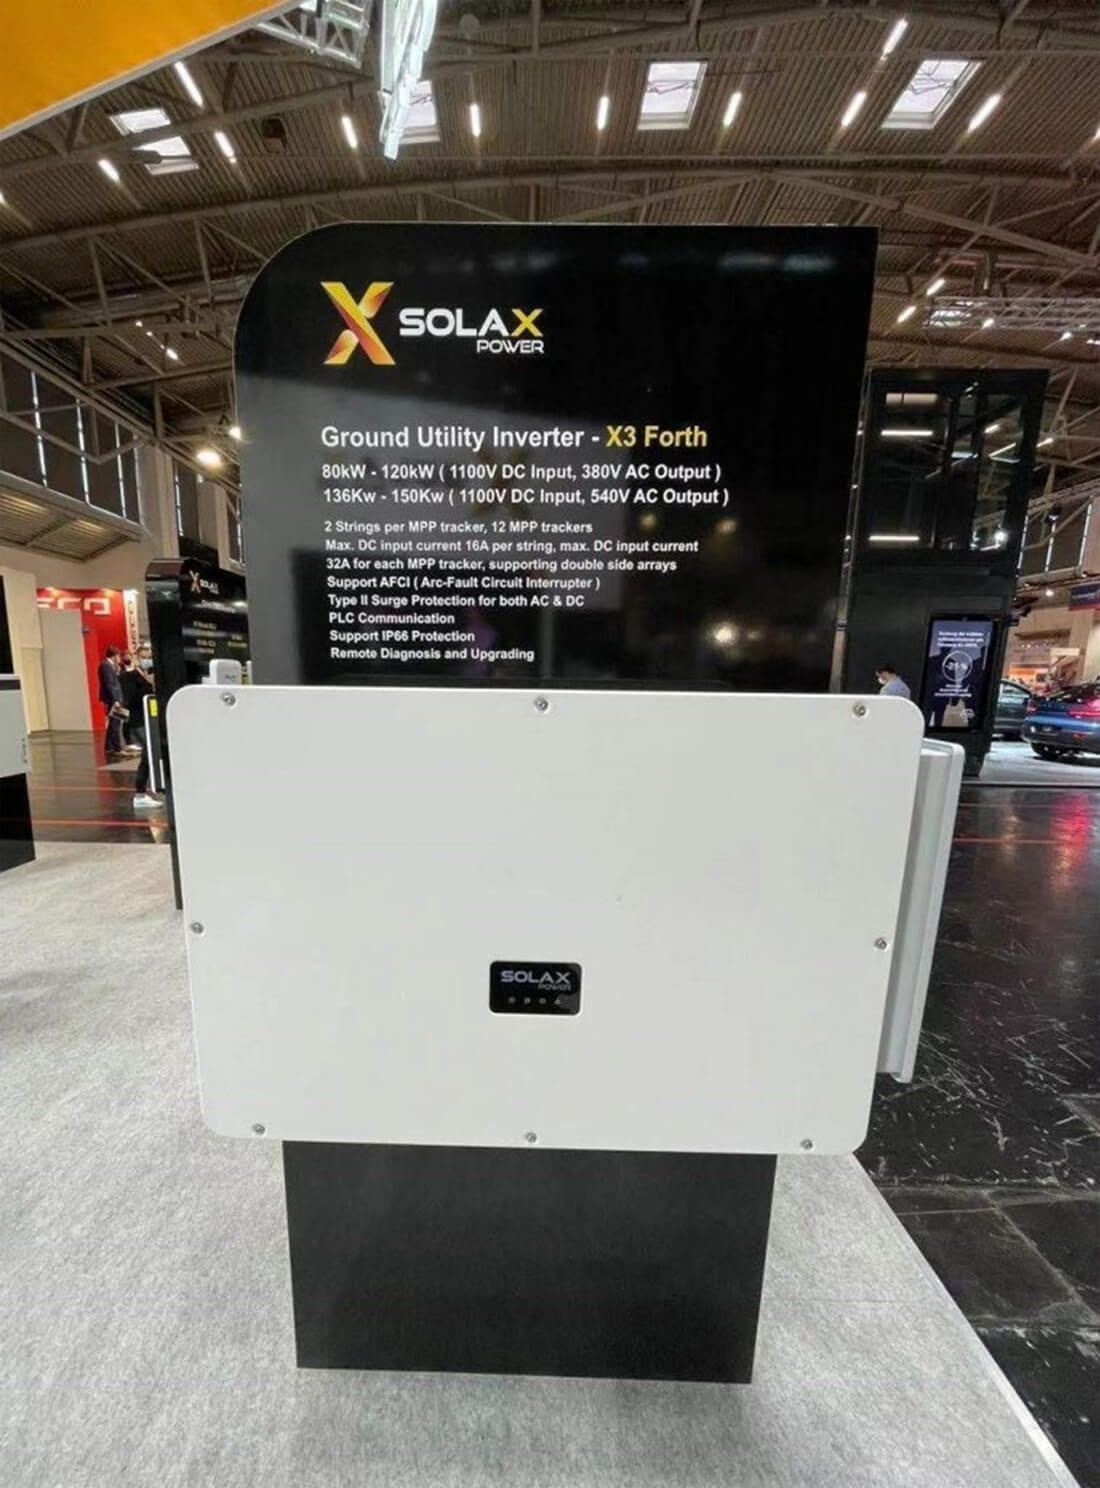 SolaX Power Unveiled the Latest Commercial Series at Intersolar Europe